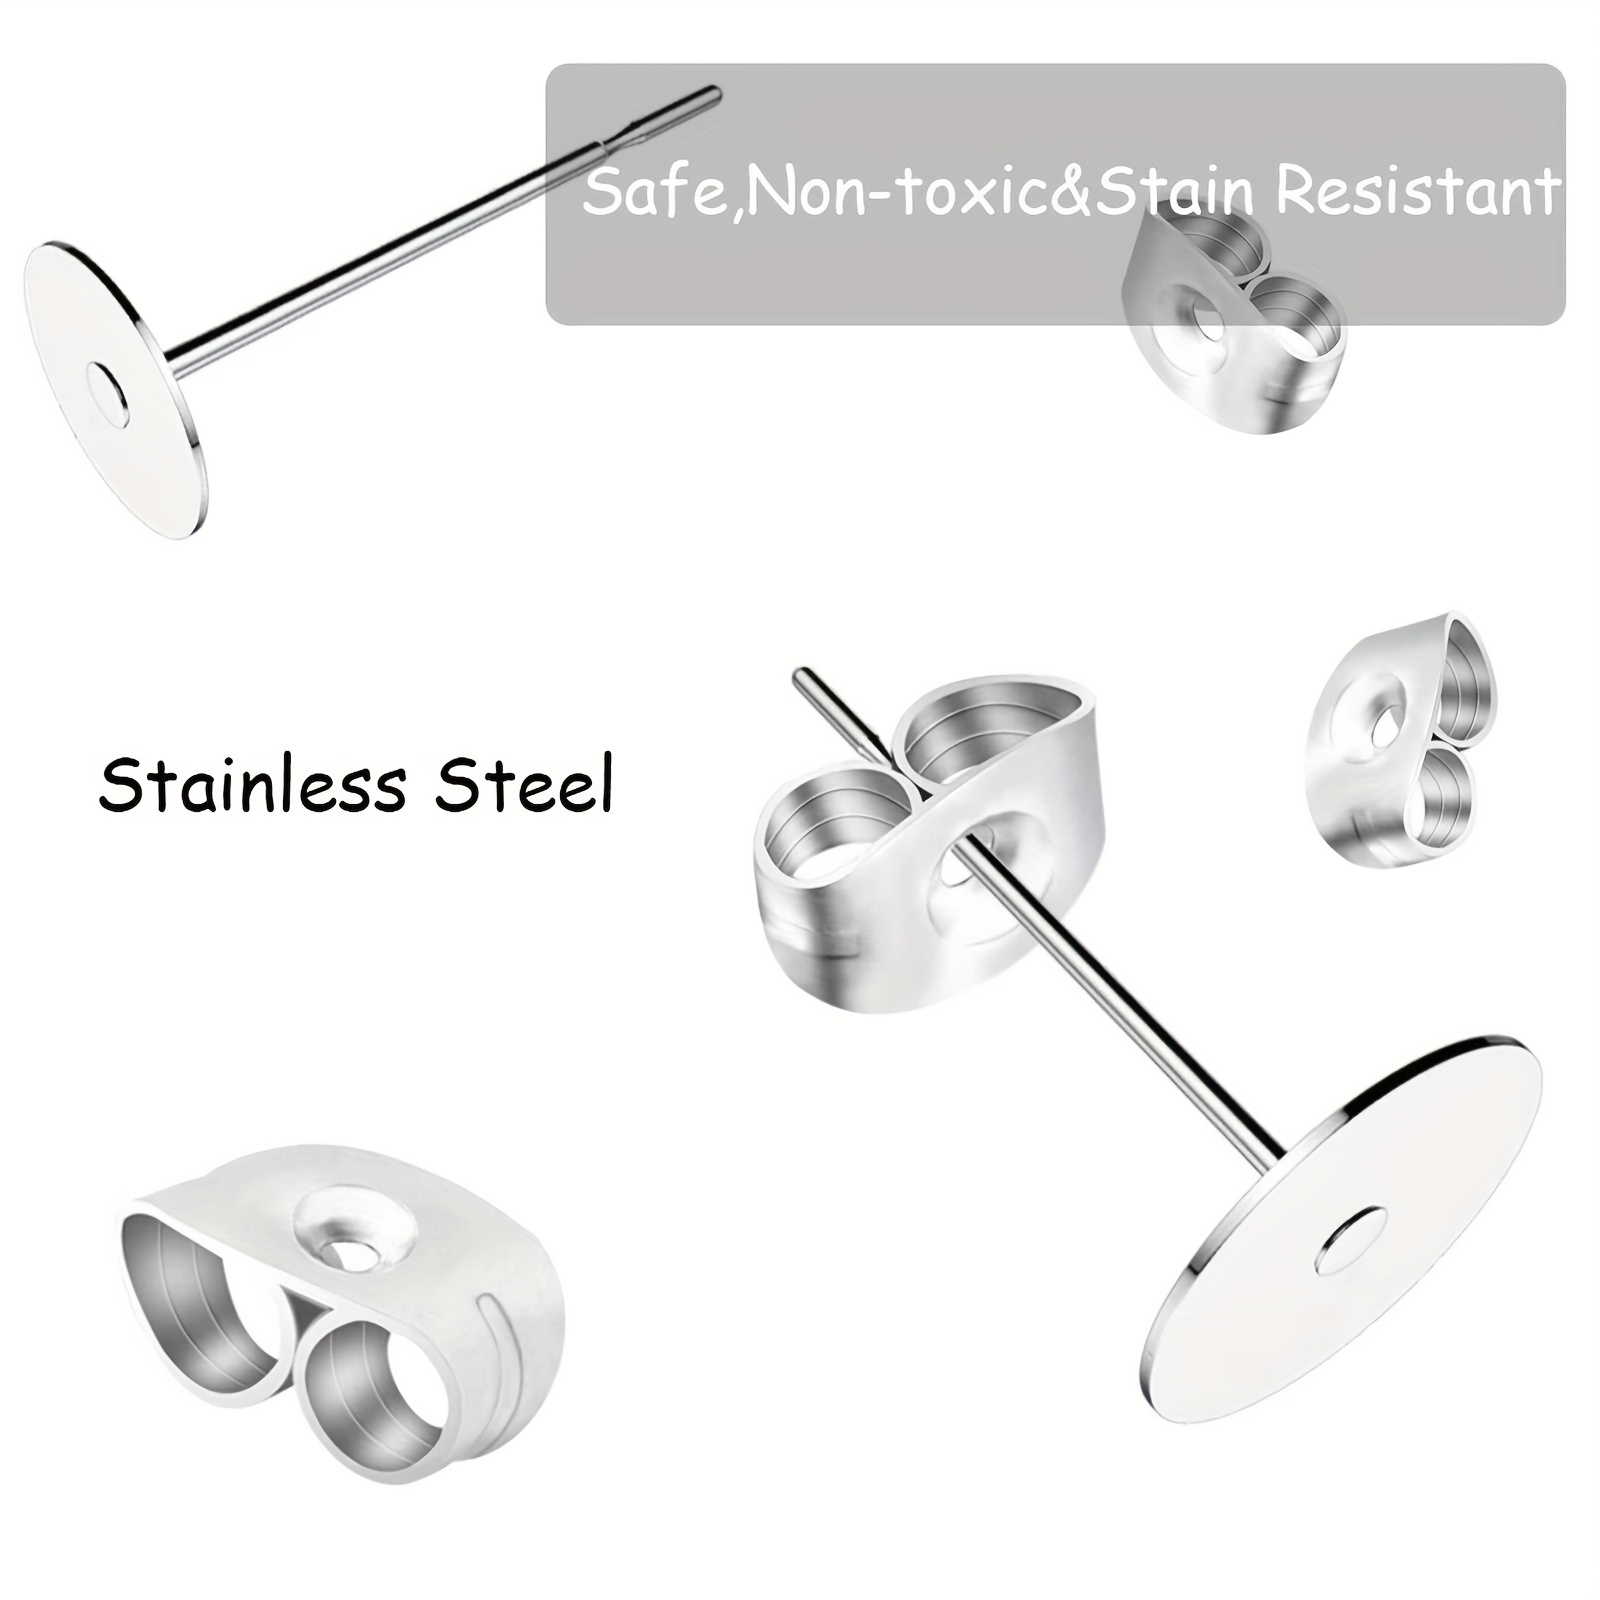 200PCS Nickel-free Stainless Steel Earrings Posts Flat Pad, Earring Backs  for Studs, Hypoallergenic Earring Studs with Butterfly and Rubber Bullet